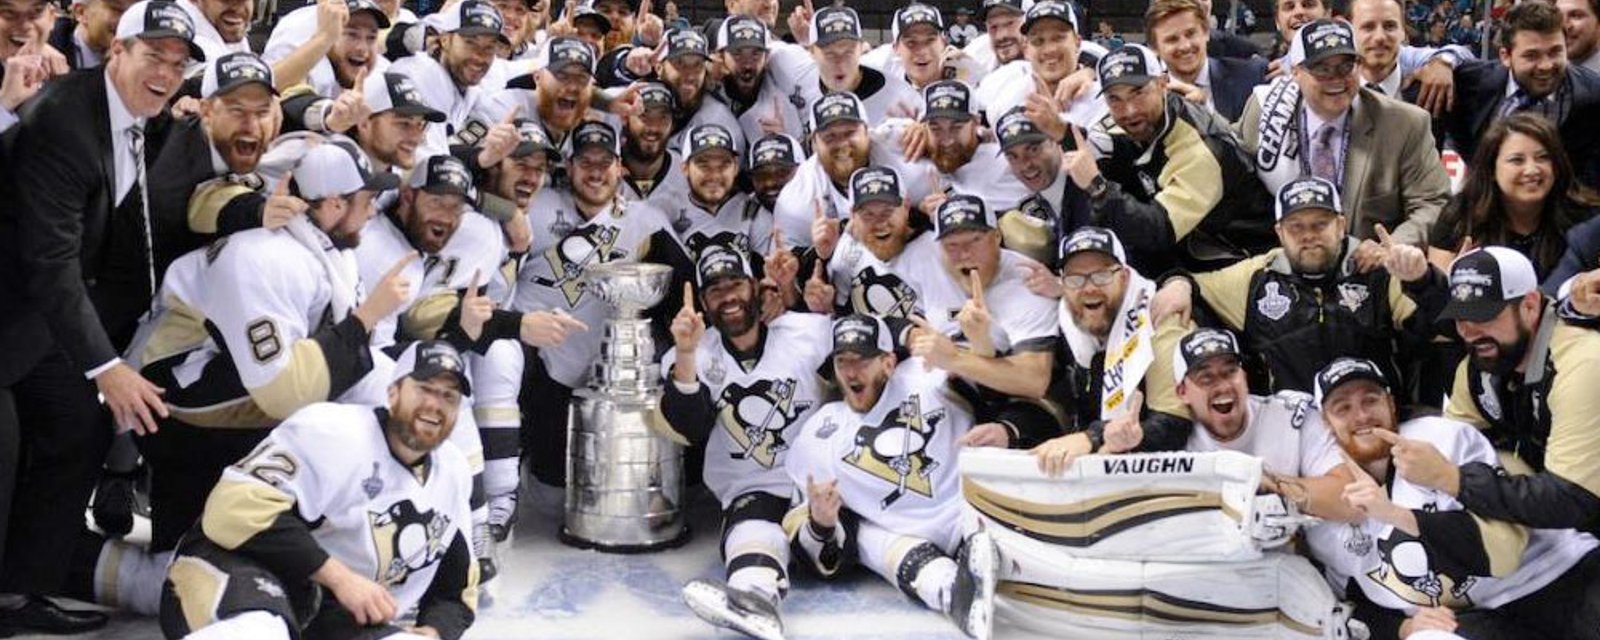 Stanley Cup champion officially retires after 11 year career